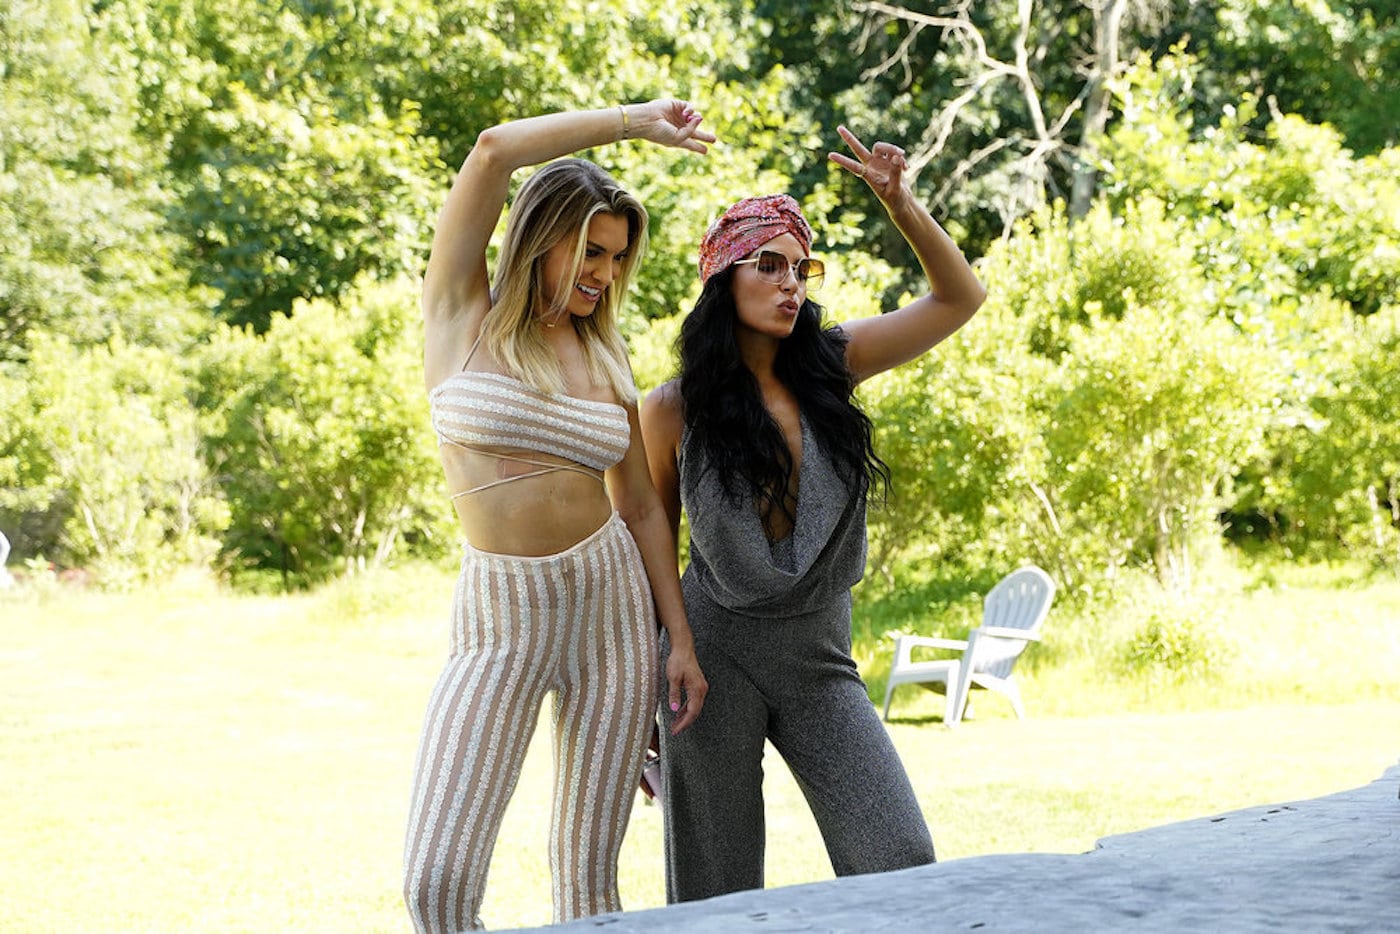 Lindsay Hubbard, Danielle Olivera from 'Summer House' stand next to each other and pose